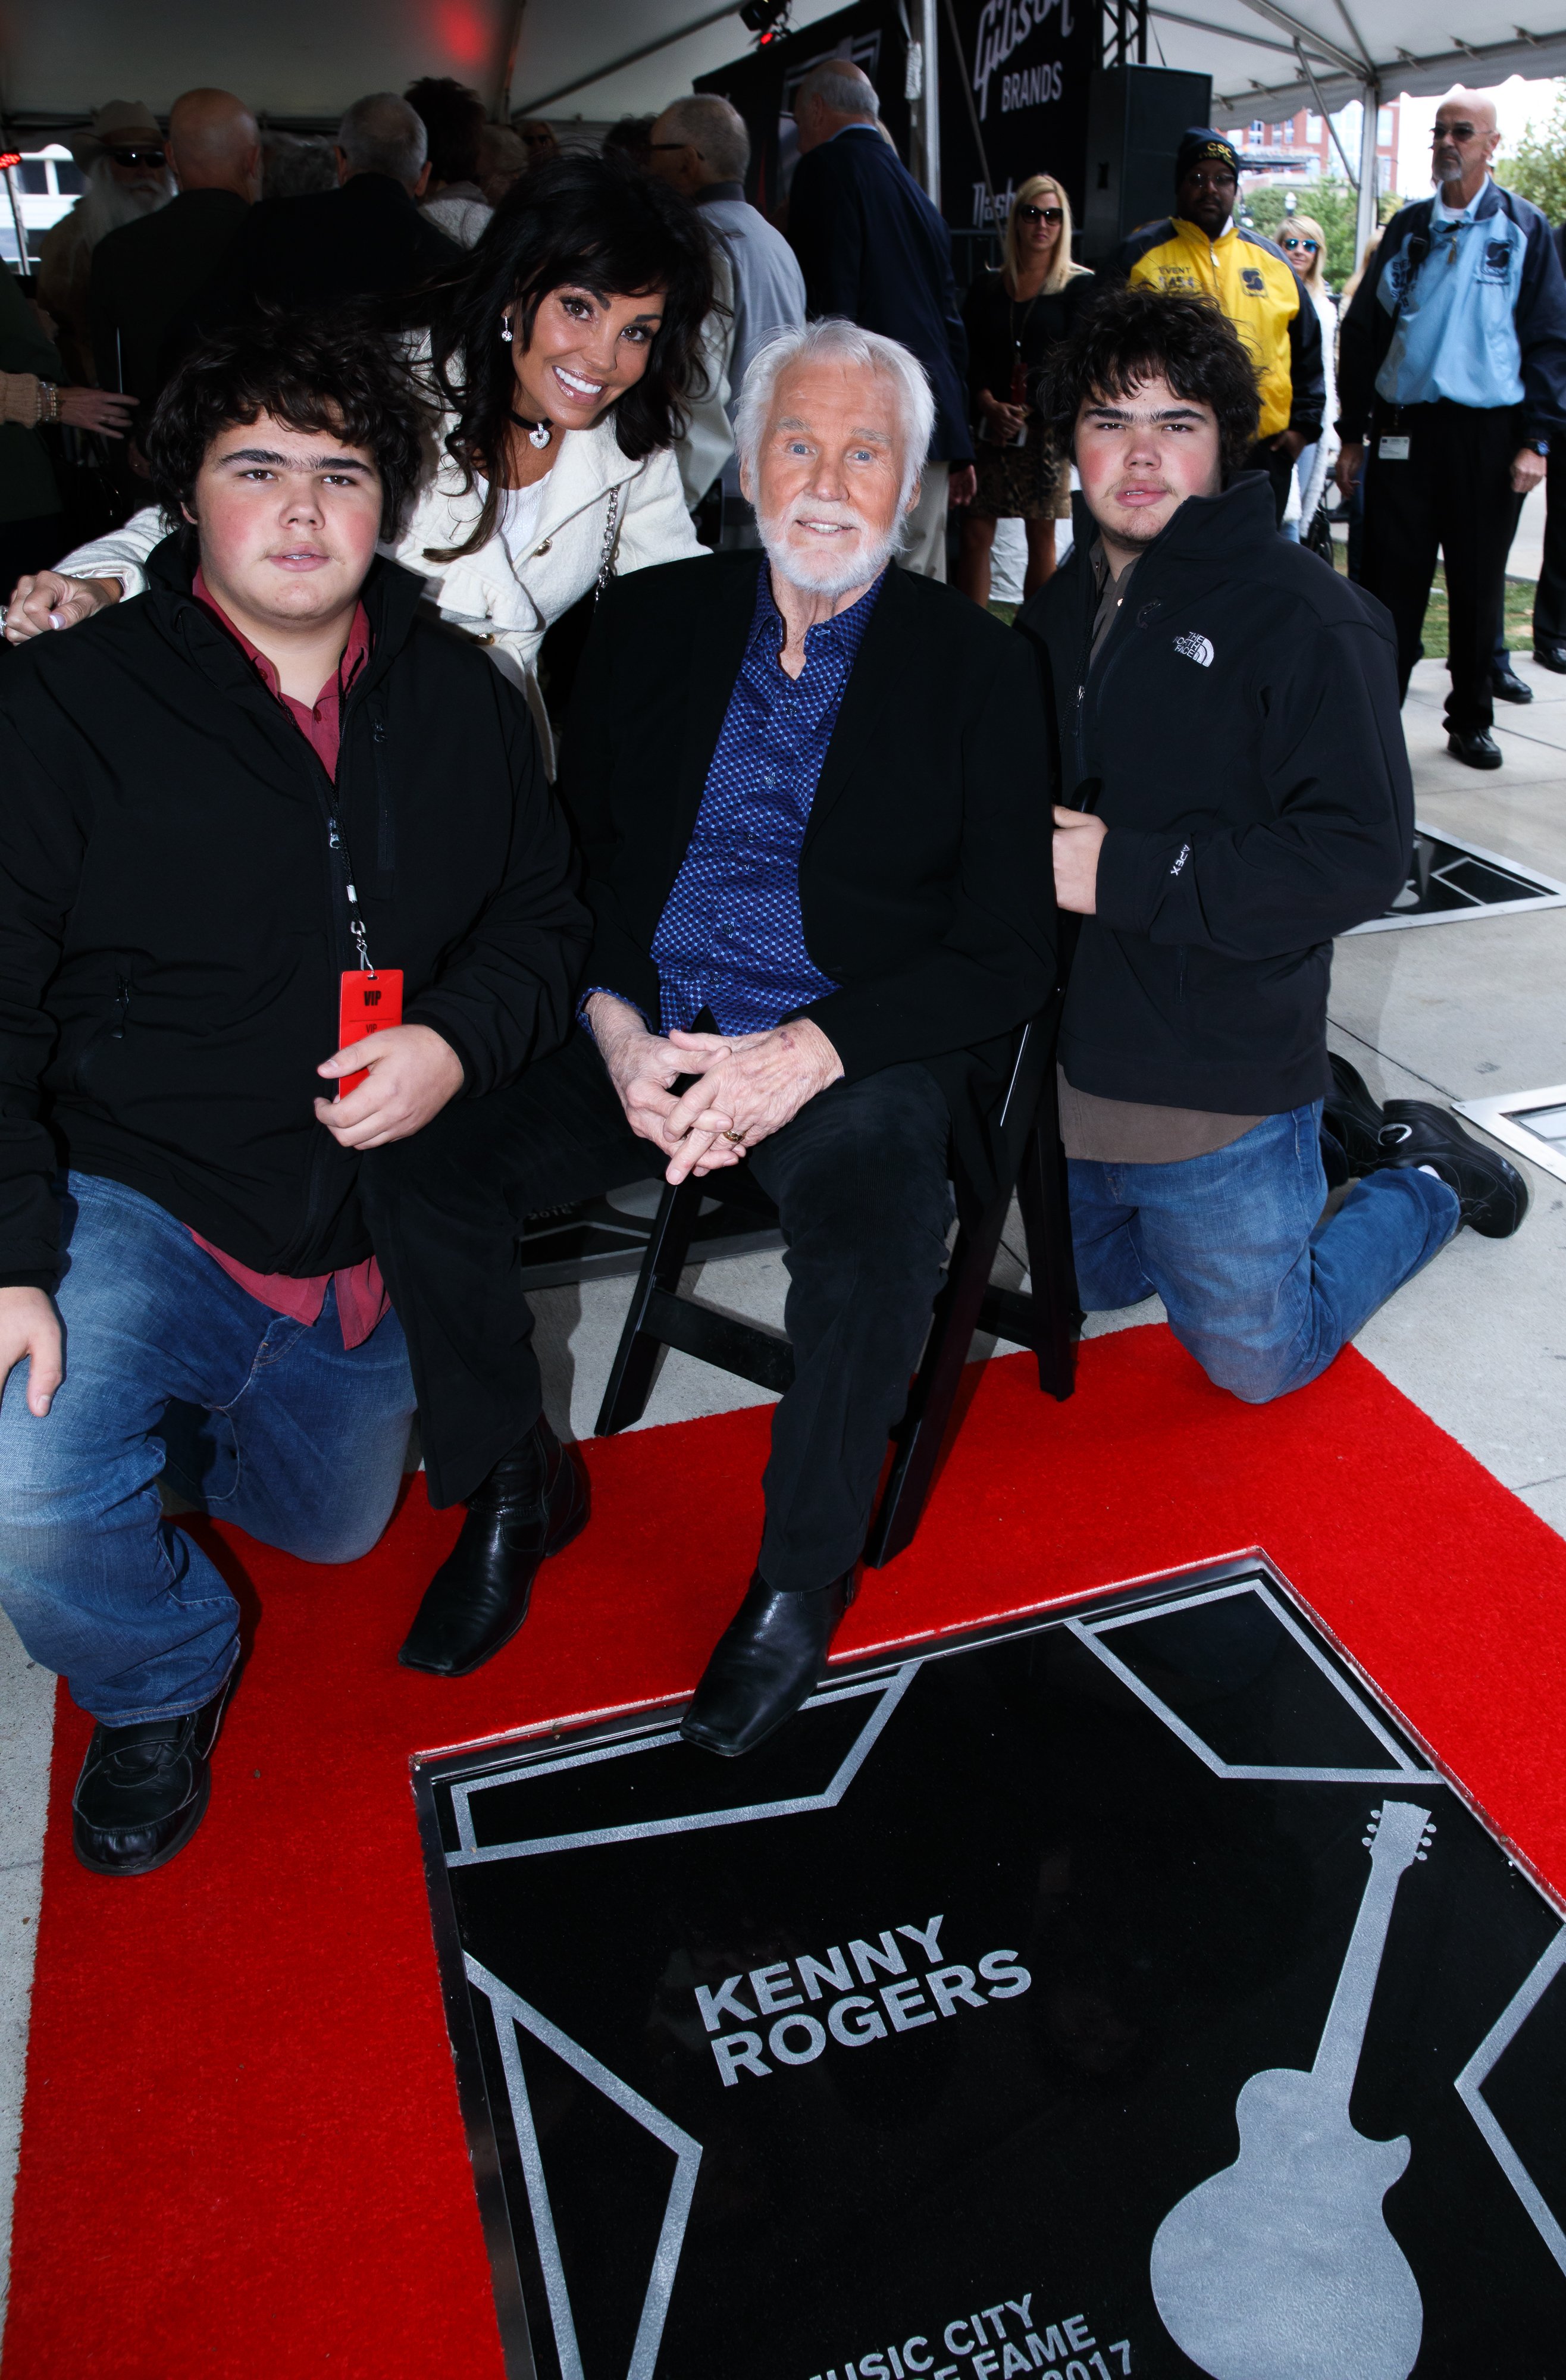 Kenny Rogers with wife Wanda Miller and their twin sons Justin and Jordan Rogers during as his induction into The Nashville Music City Walk of Fame at Nashville Music City Walk of Fame on October 24, 2017 in Nashville, Tennessee. / Source: Getty Images